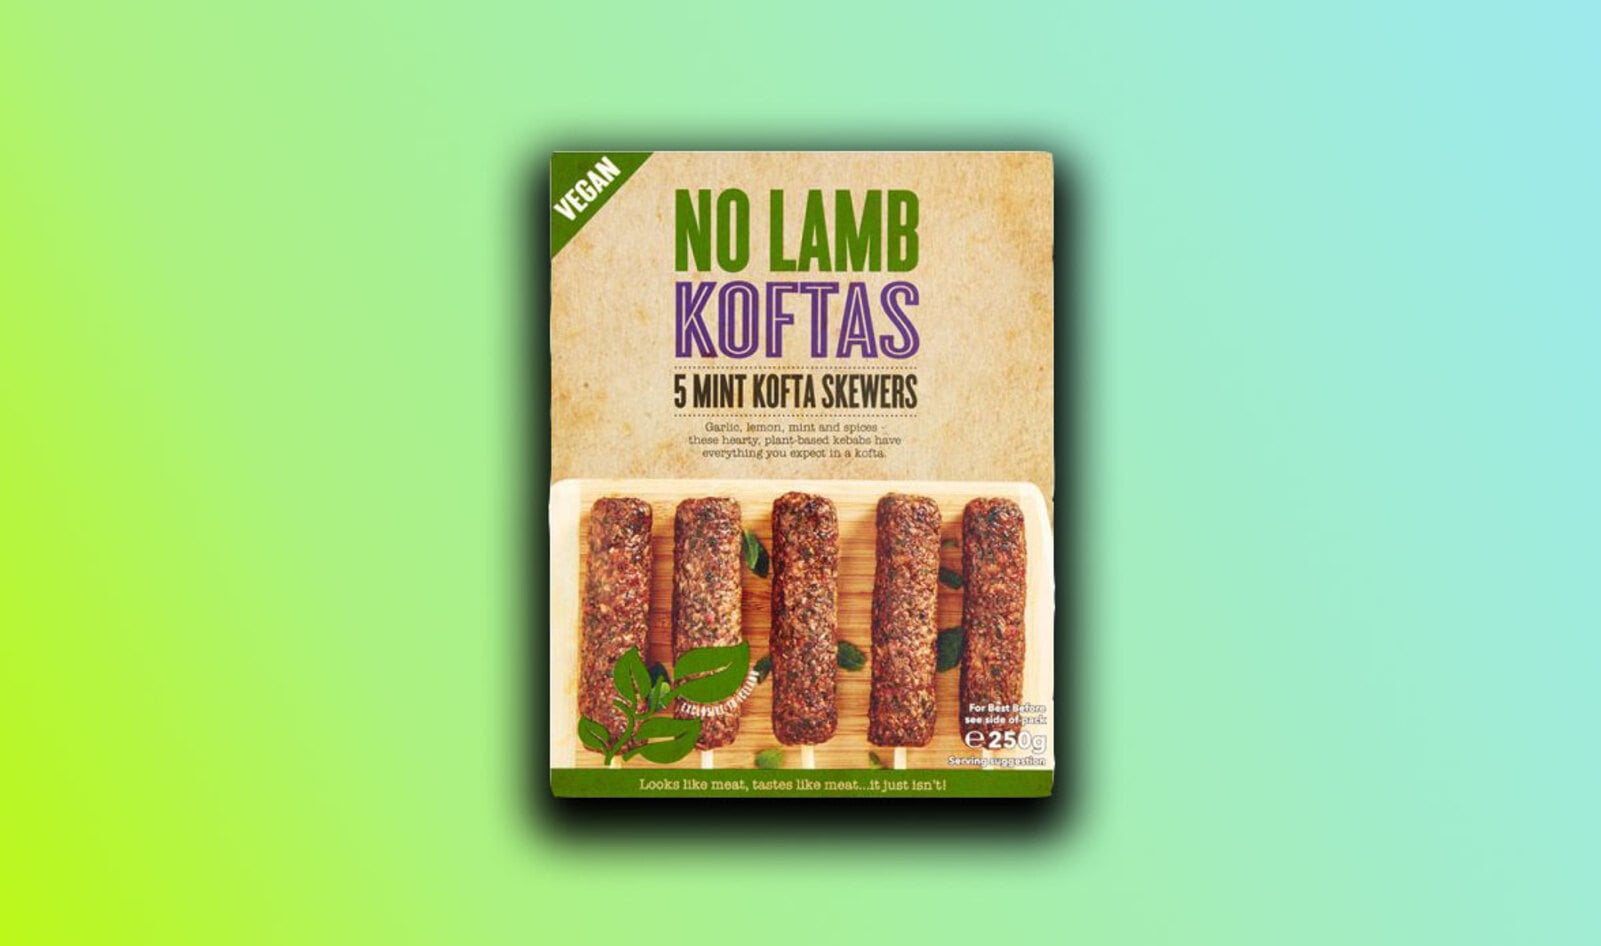 Grocery Chain Iceland Launches Vegan Lamb Kofta Skewers and Pulled Pork Burgers